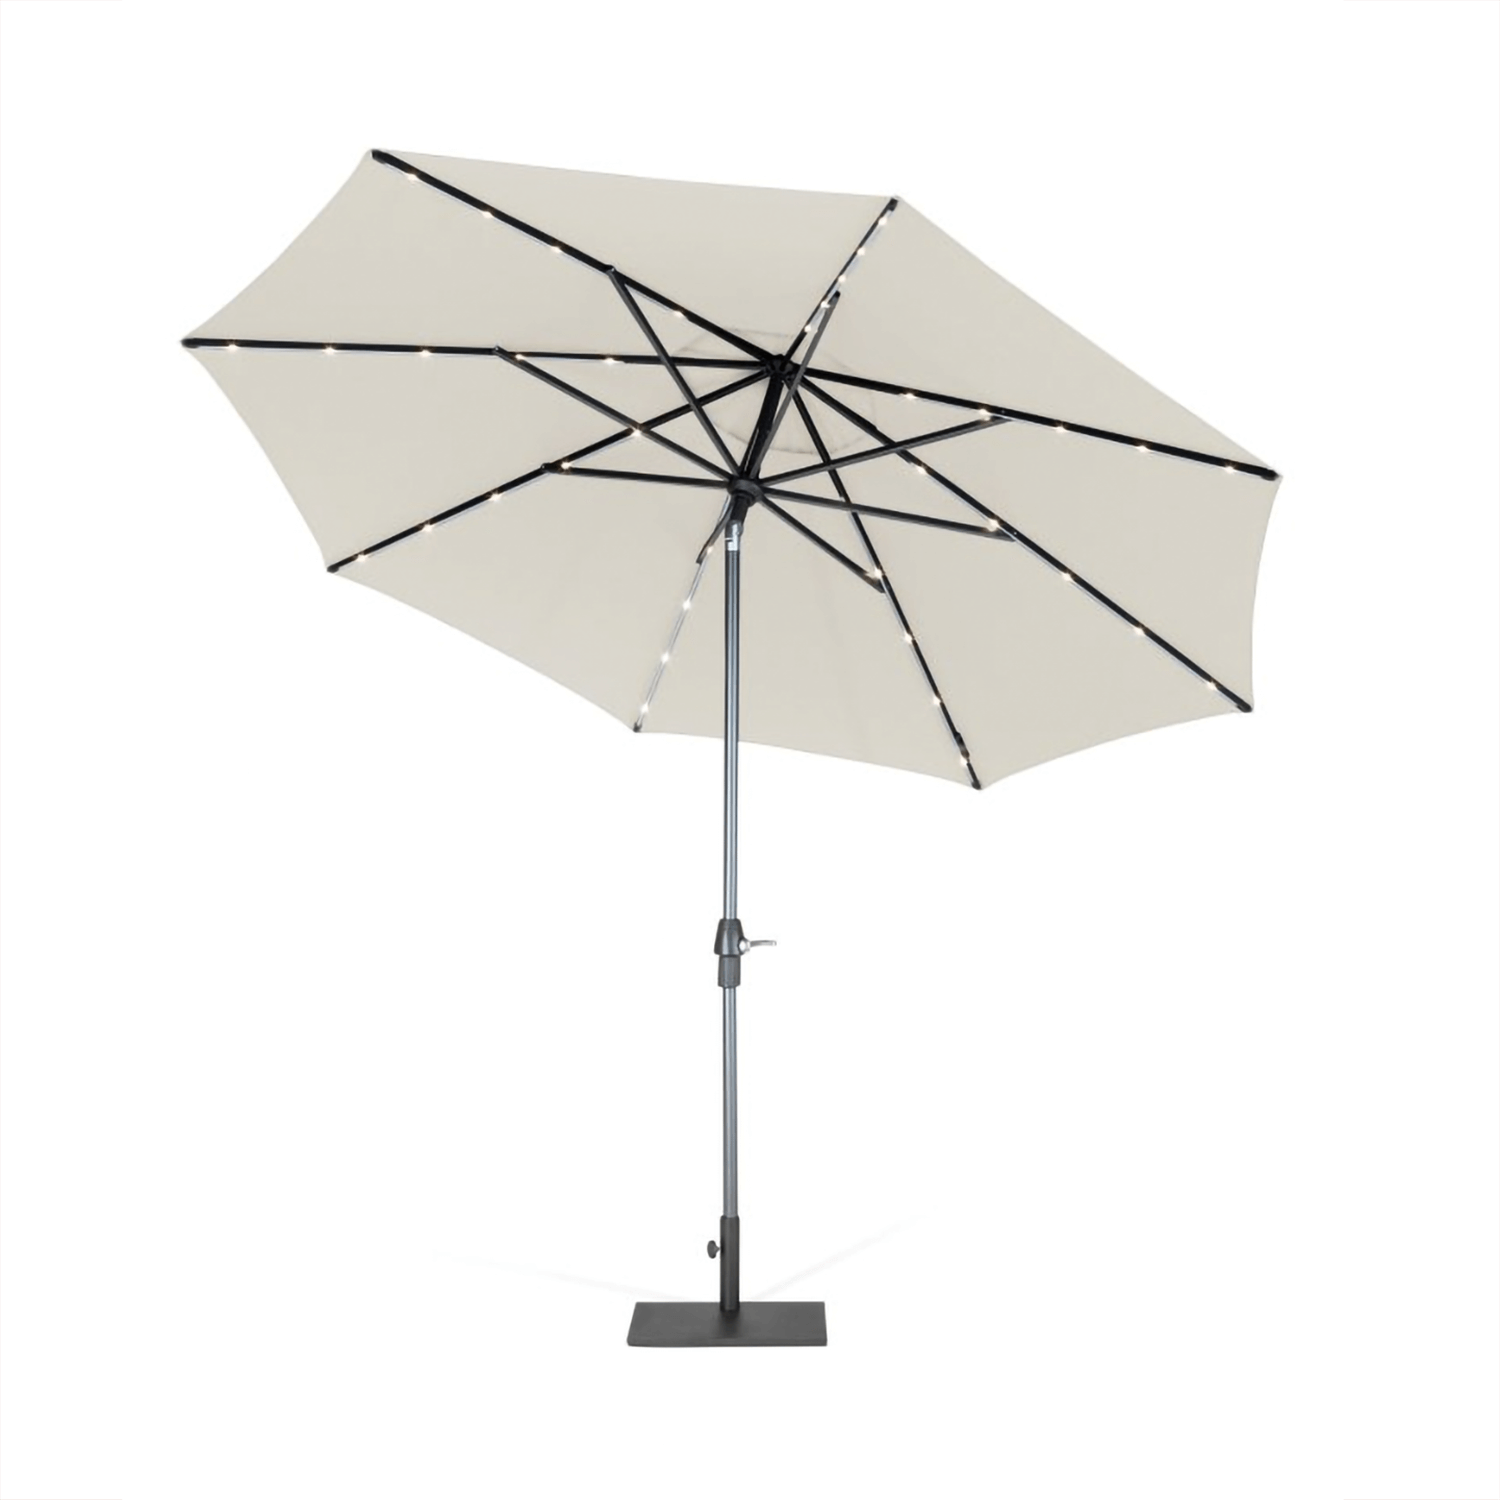 Small Image of Kettler 3.0m Wind up Parasol with Tilt, Natural Canopy and LED Lights